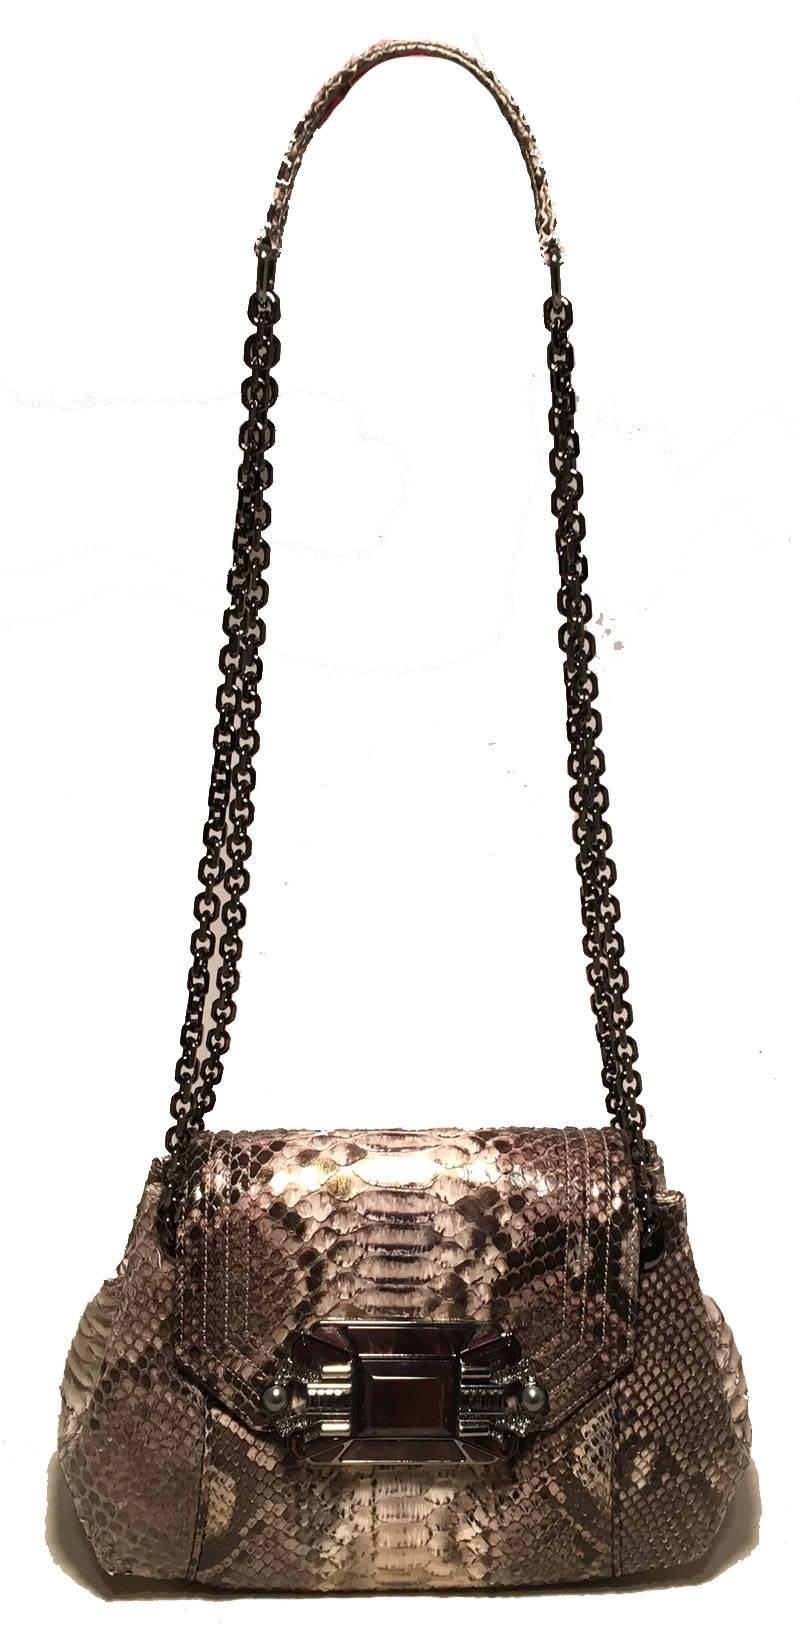 GORGEOUS Judith Leiber Natural Grey Python Snakeskin Shoulder Bag in excellent condition.  Natural grey python snakeskin exterior trimmed with gunmetal hardware, maroon stones and pearls.  Front snap closure opens to a purple silk interior that